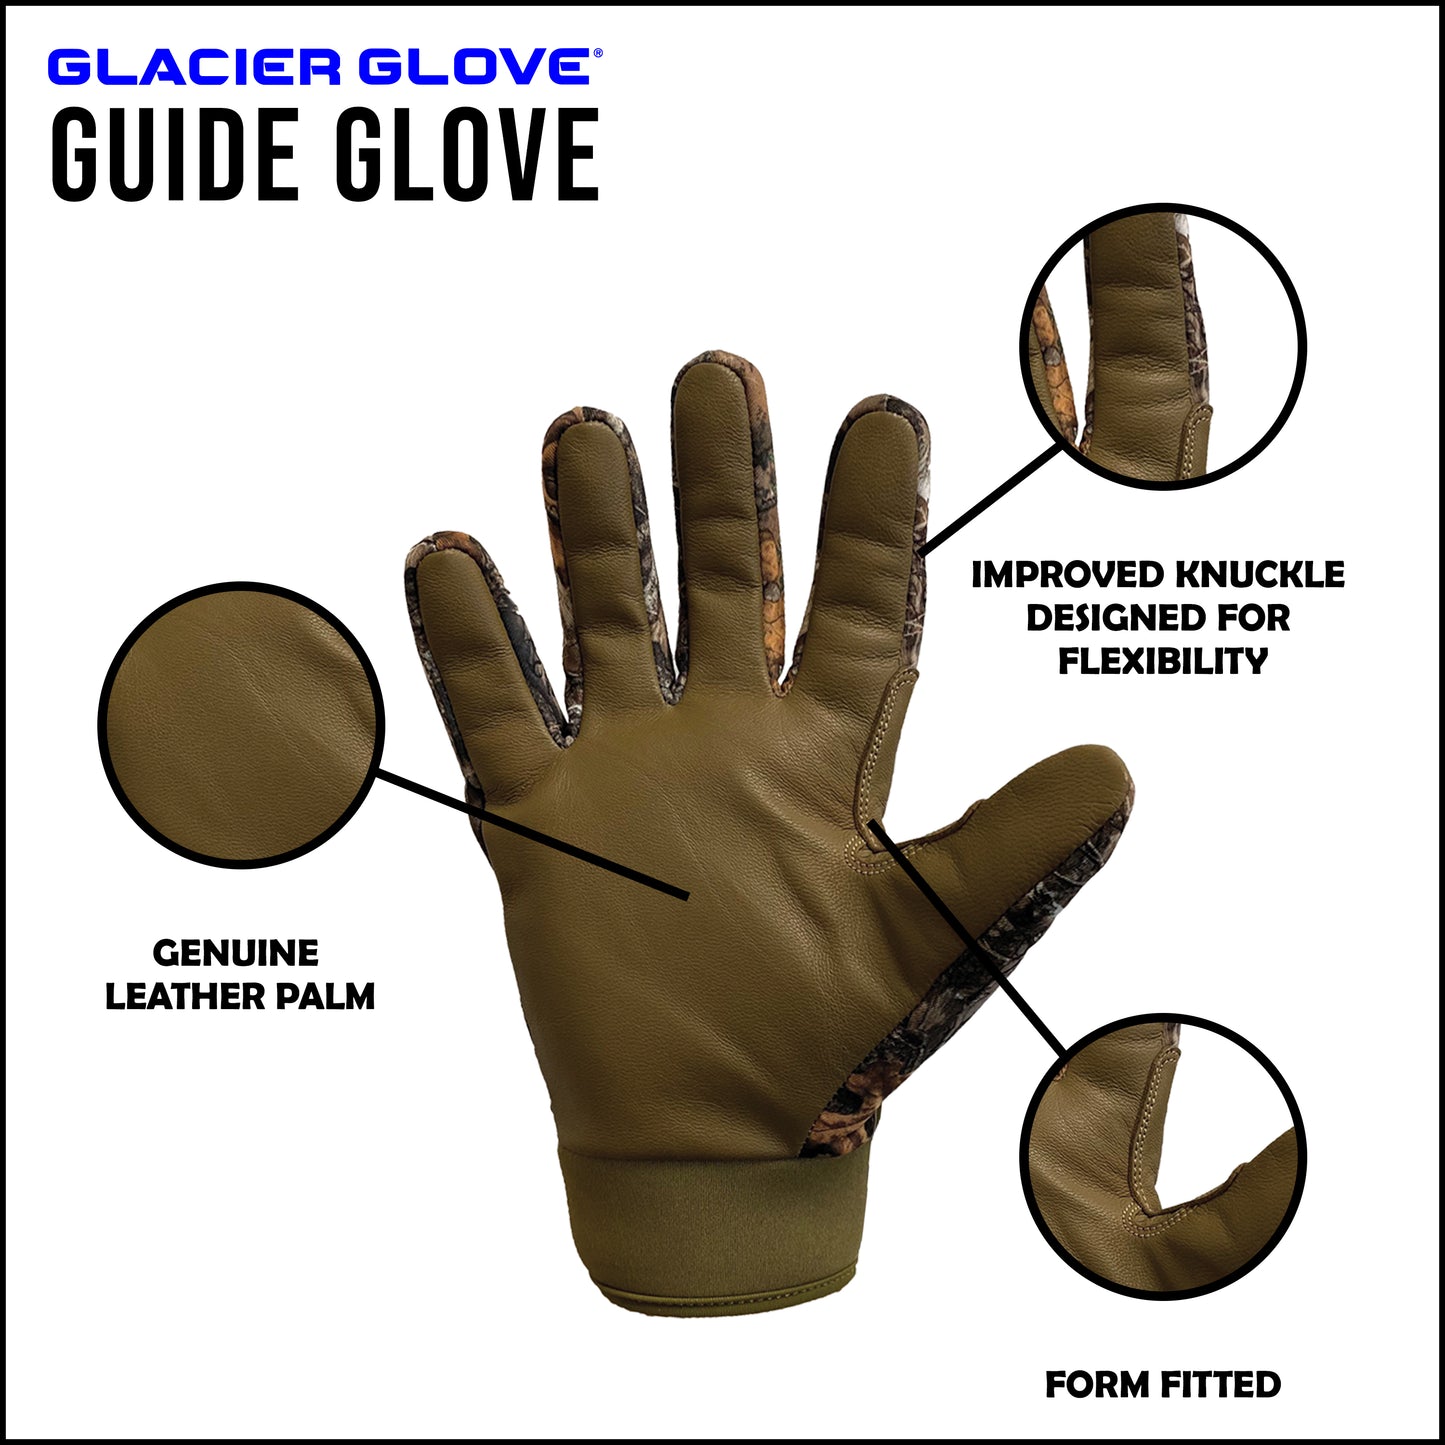 Featuring the Realtree EDGE HD pattern, the Guide Glove is designed with a focus on protection and performance. Its durability and functionality combined with dexterity and comfort makes this glove the perfect choice for rugged outdoor environments.